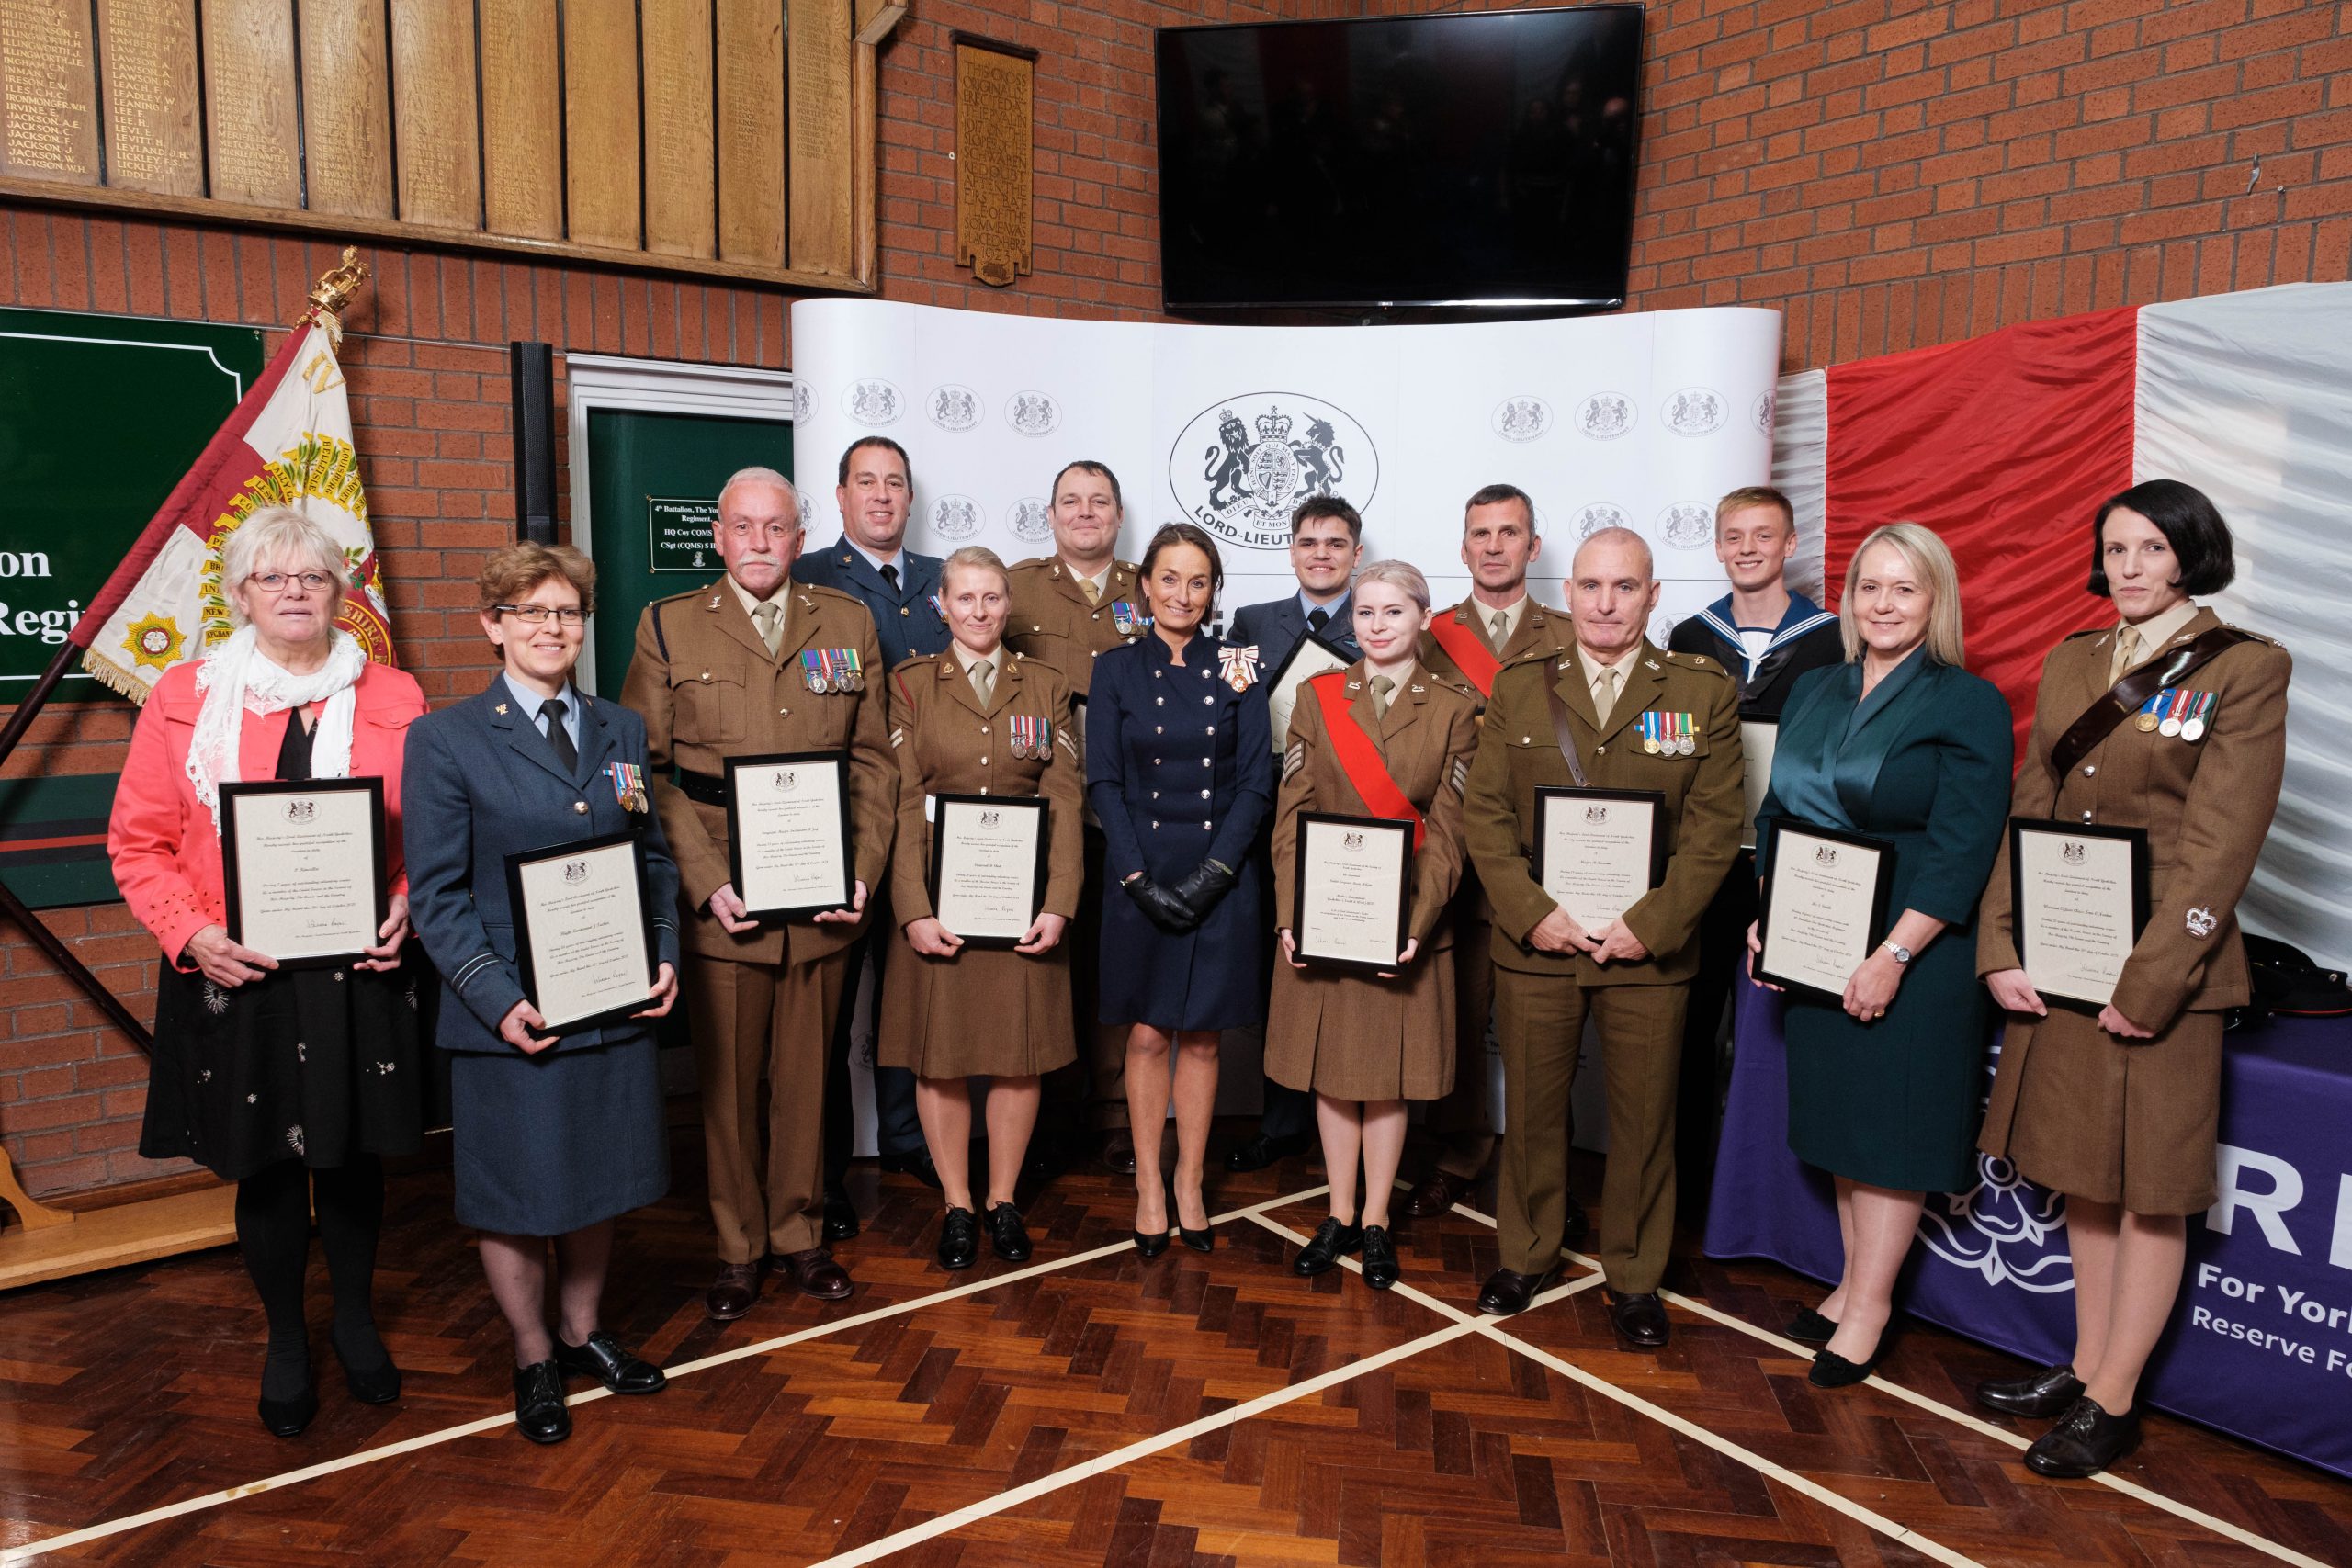 Her Majesty's Lord-Lieutenant of North Yorkshire with award recipients 2021